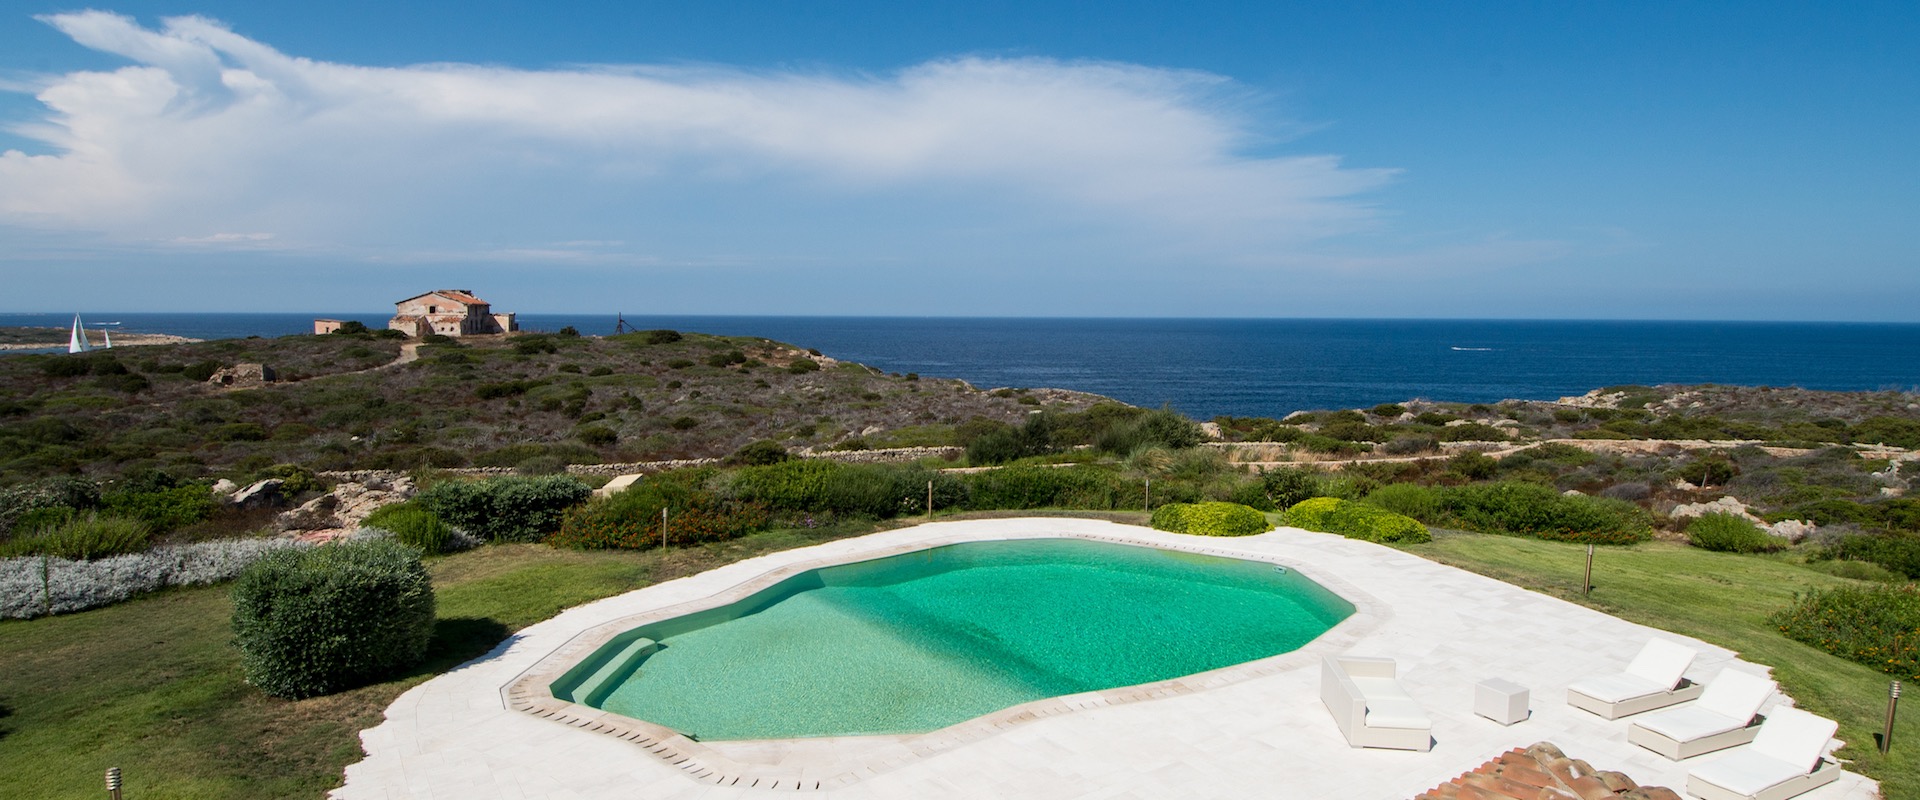 Villa Light House swimming pool with an astonishing view.